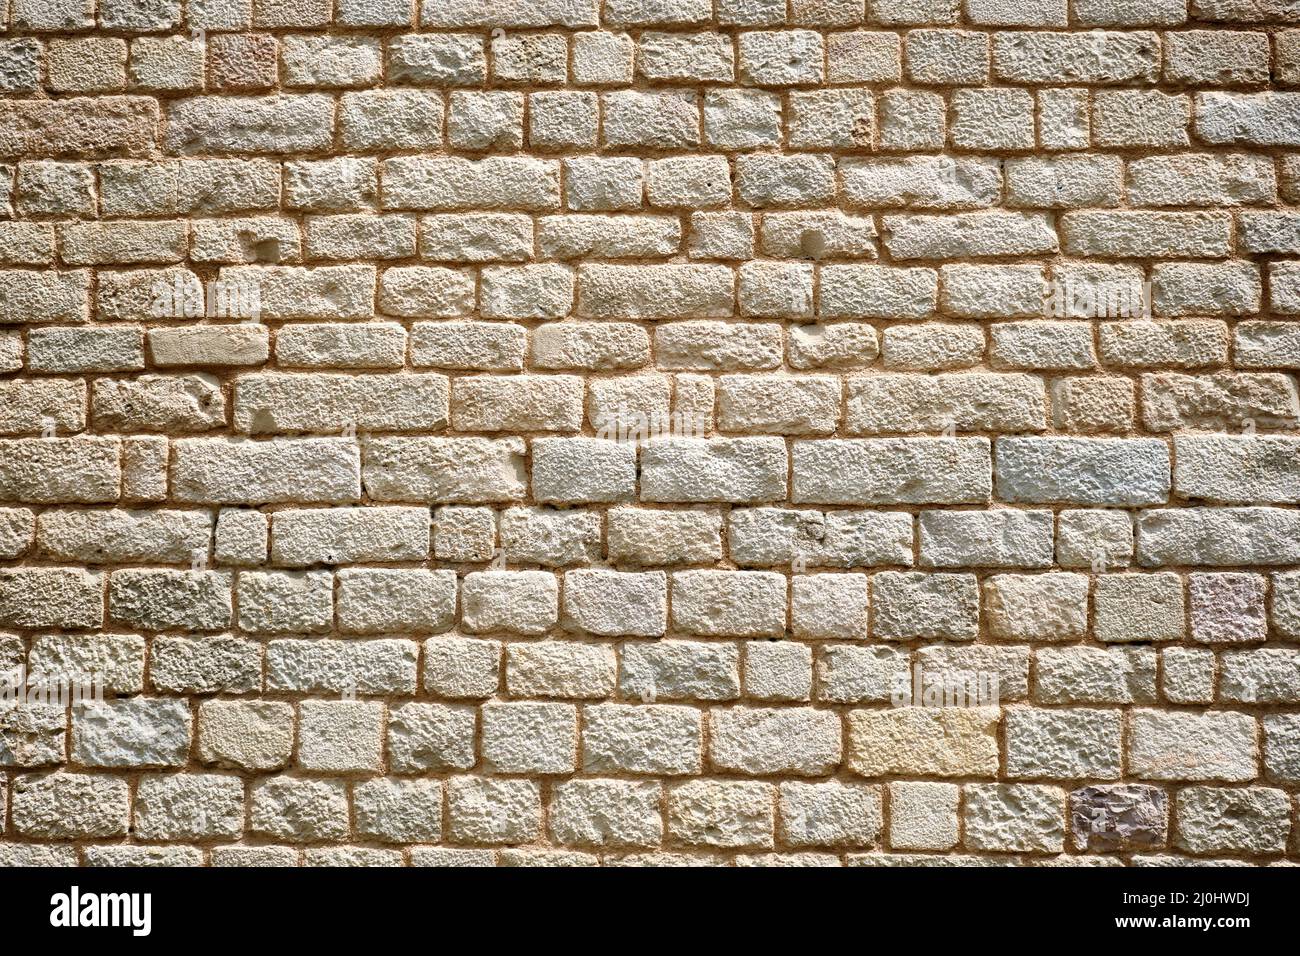 Background from a regular natural old stone wall Stock Photo